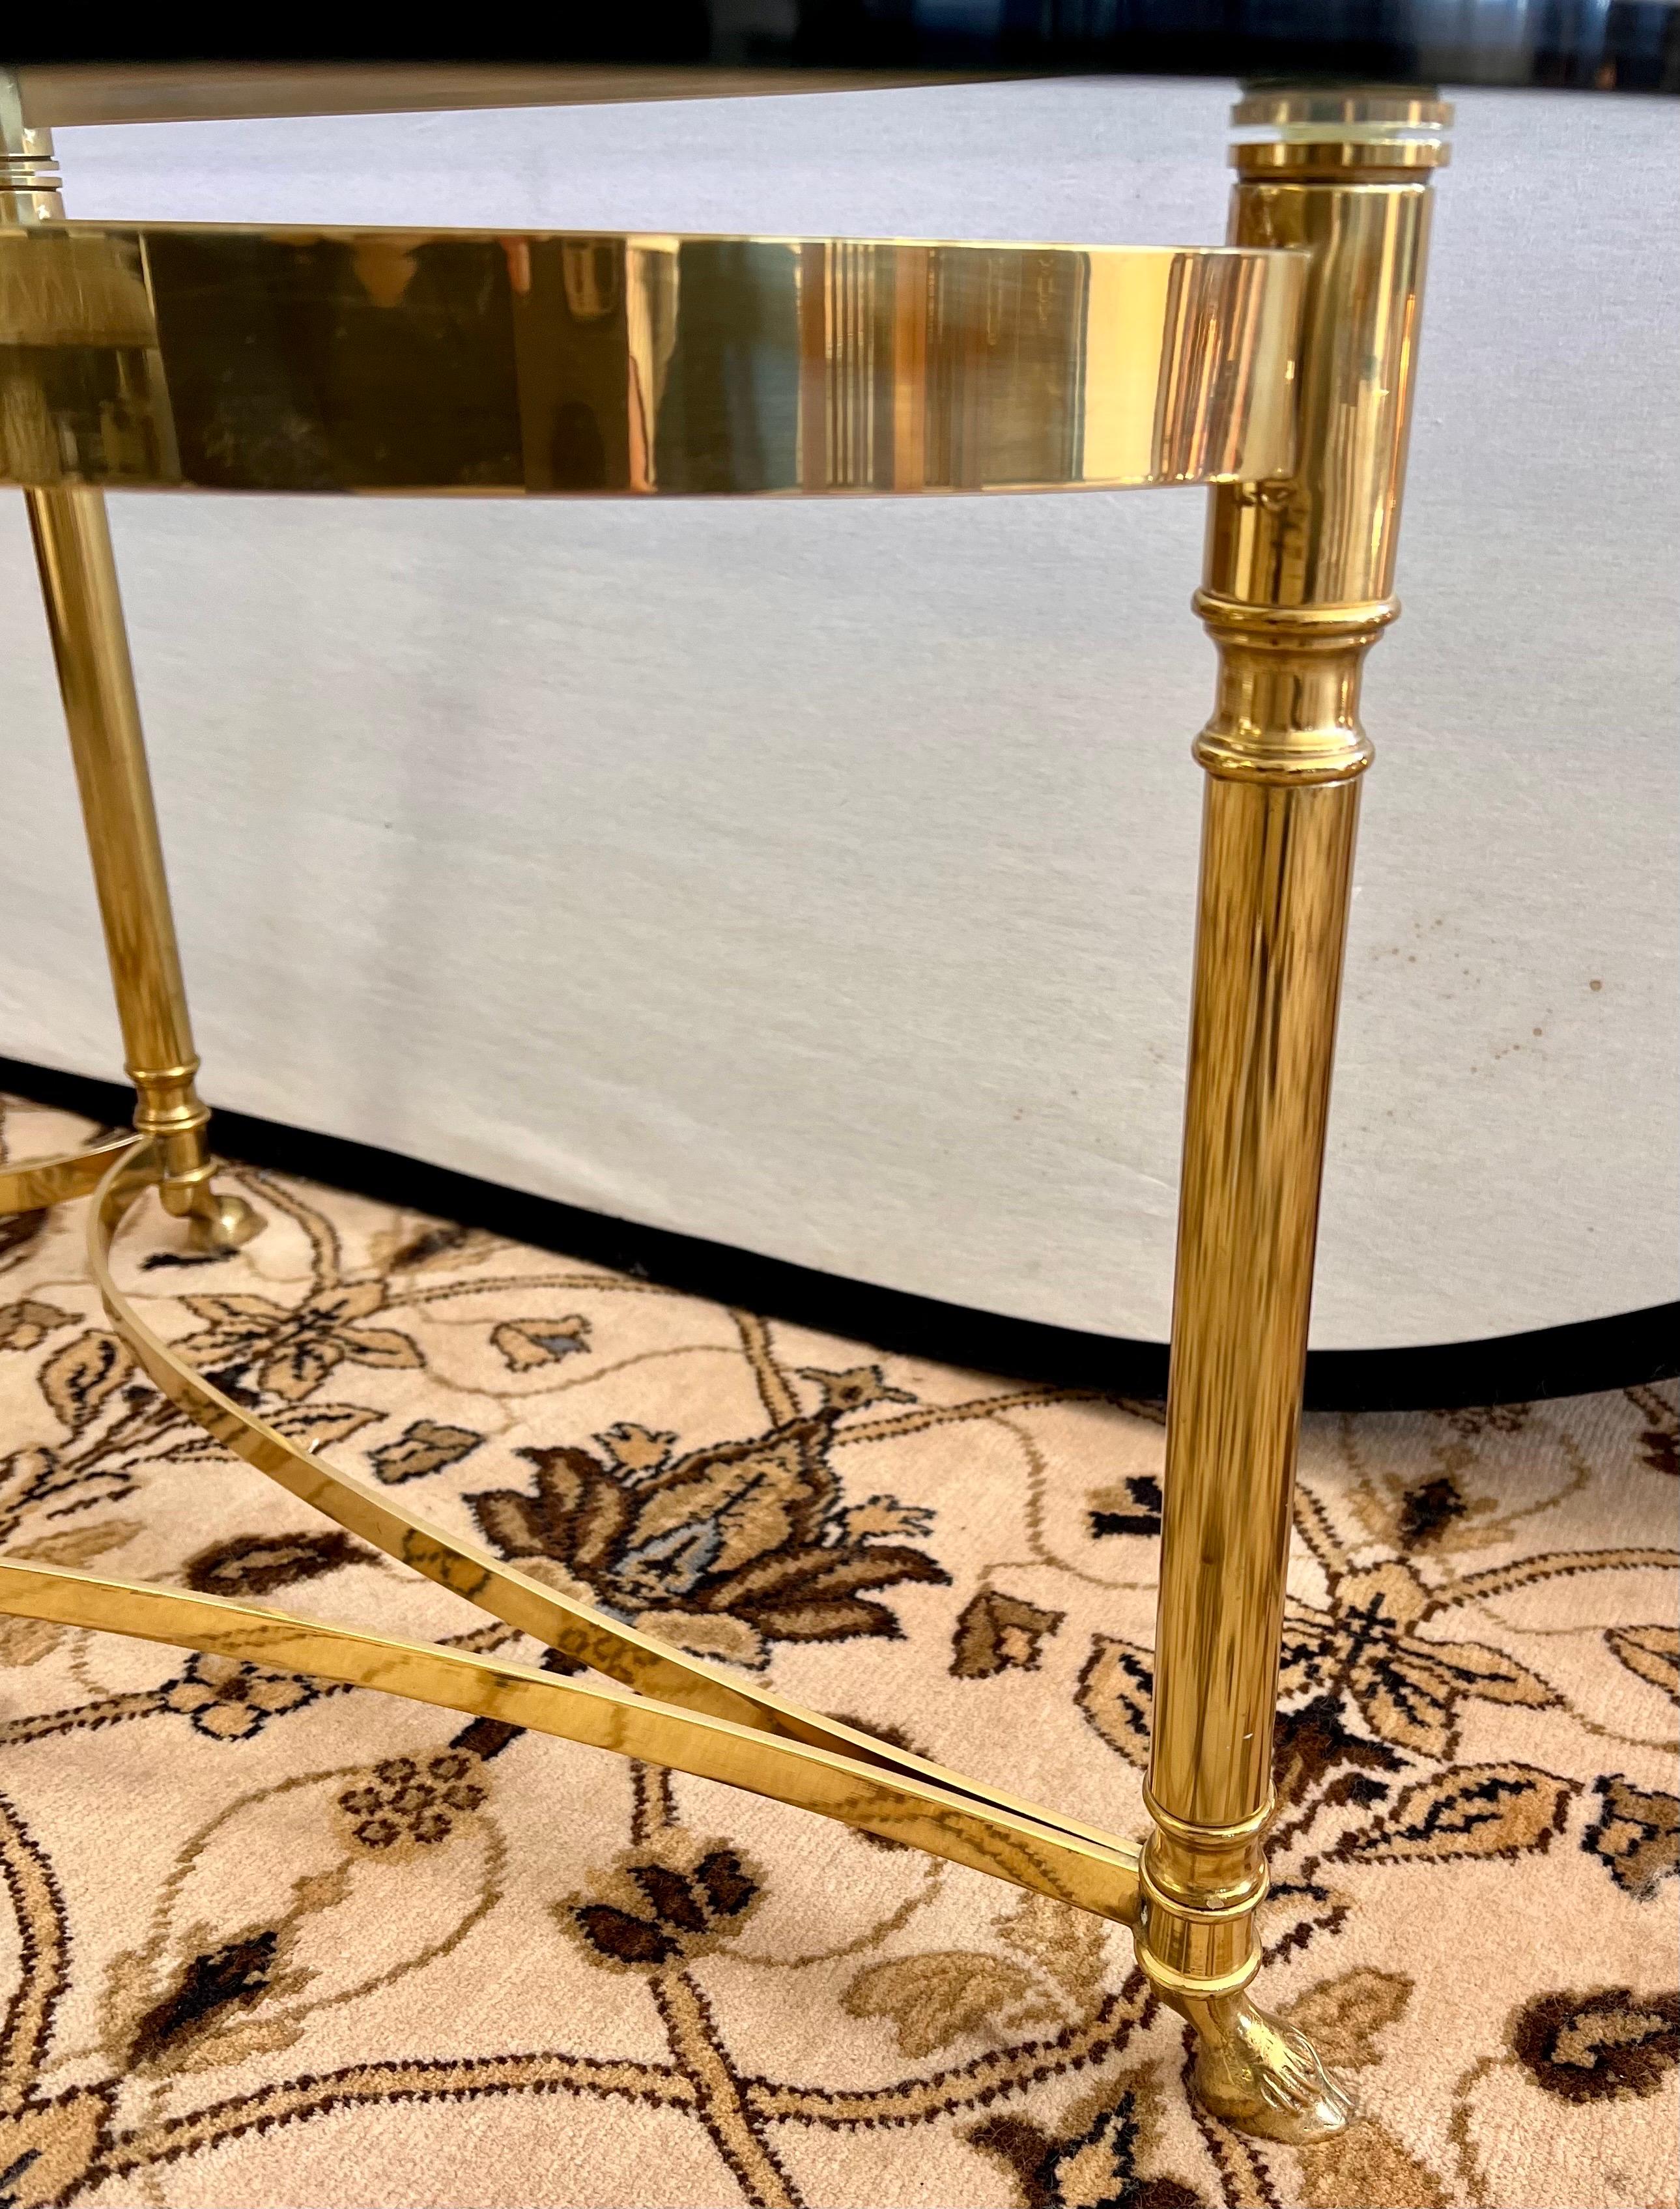 Stunning Mid-Century Modern cocktail table with elegant solid brass base and stretcher with hoof feet that supports an oval beveled glass top. Belongs in Architectural Digest!